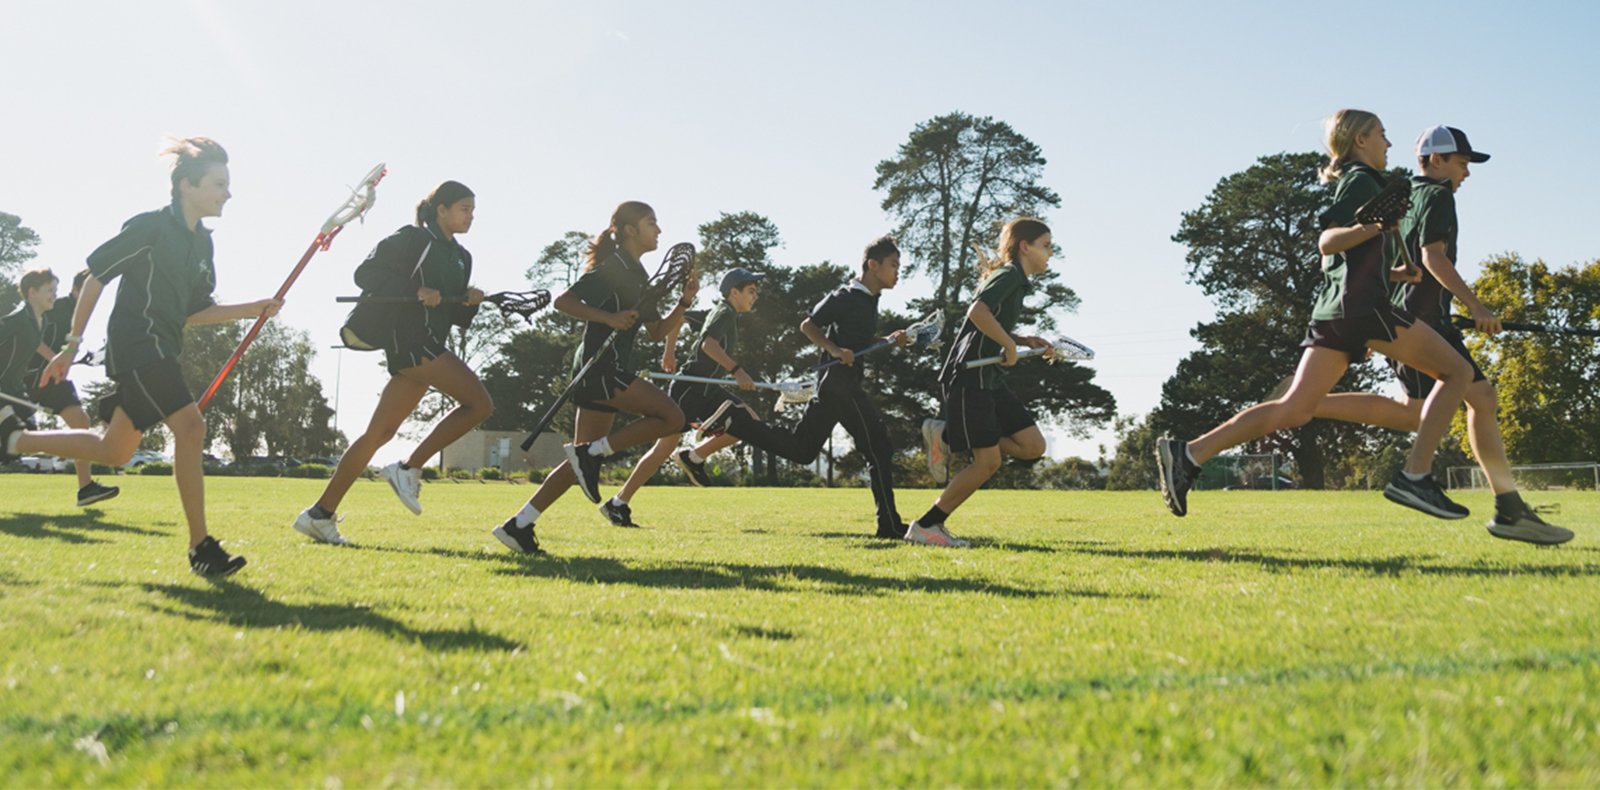 A group of students run across a field together with lacrosse sticks.